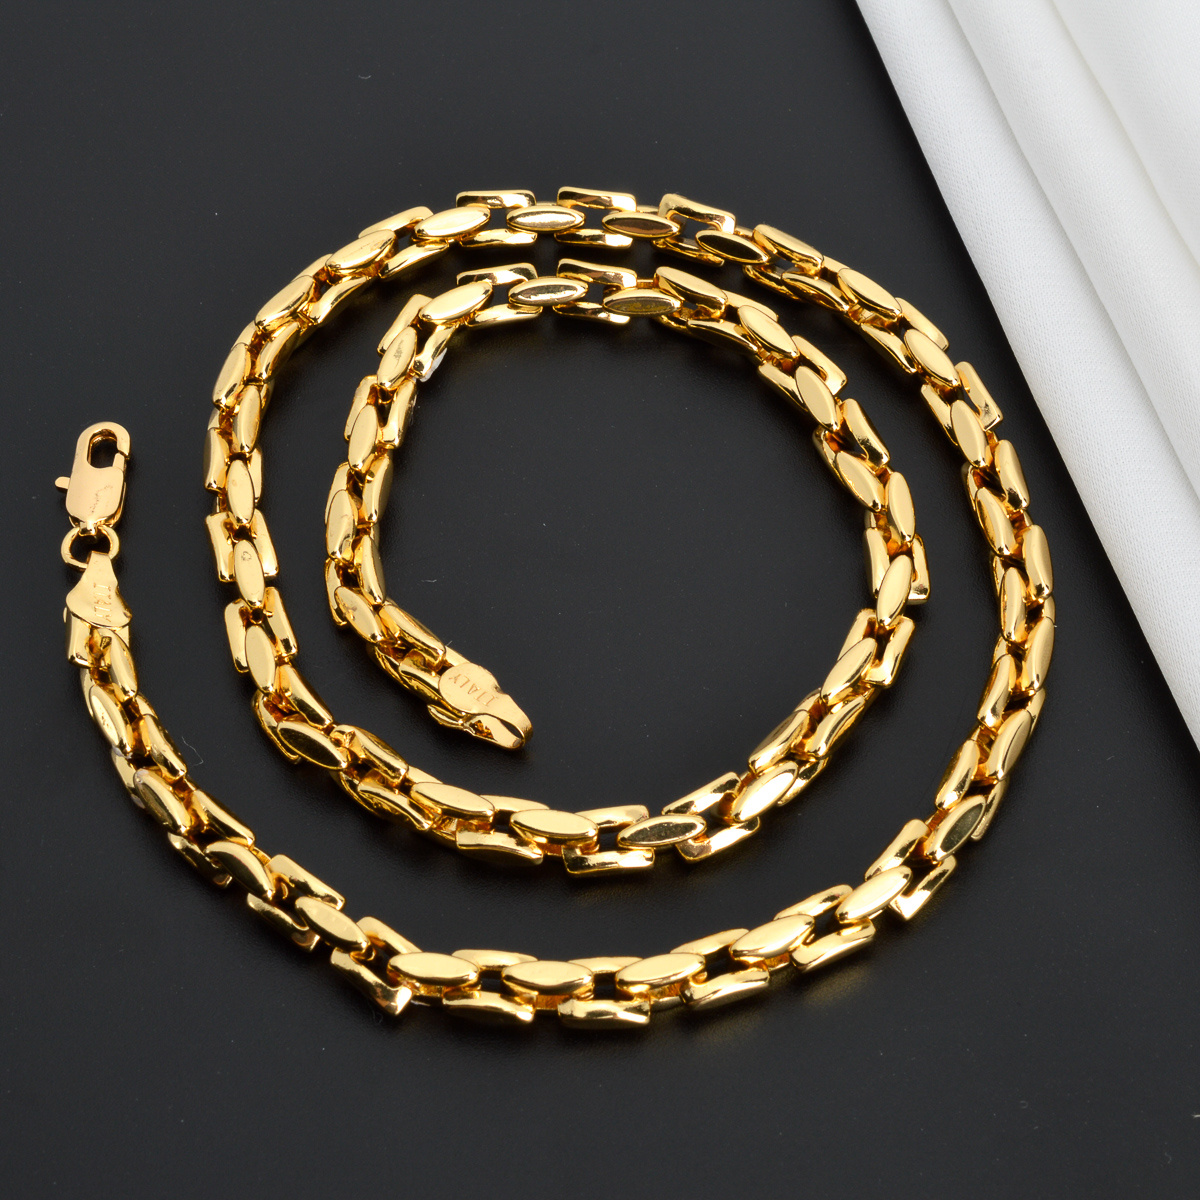 

1pc 5mm Golden Link Chain Necklace For Men And Women - Durable Copper, Electroplated With Golden Jewelry For Long-lasting Shine And Style Jewelry, Father's Day Gift